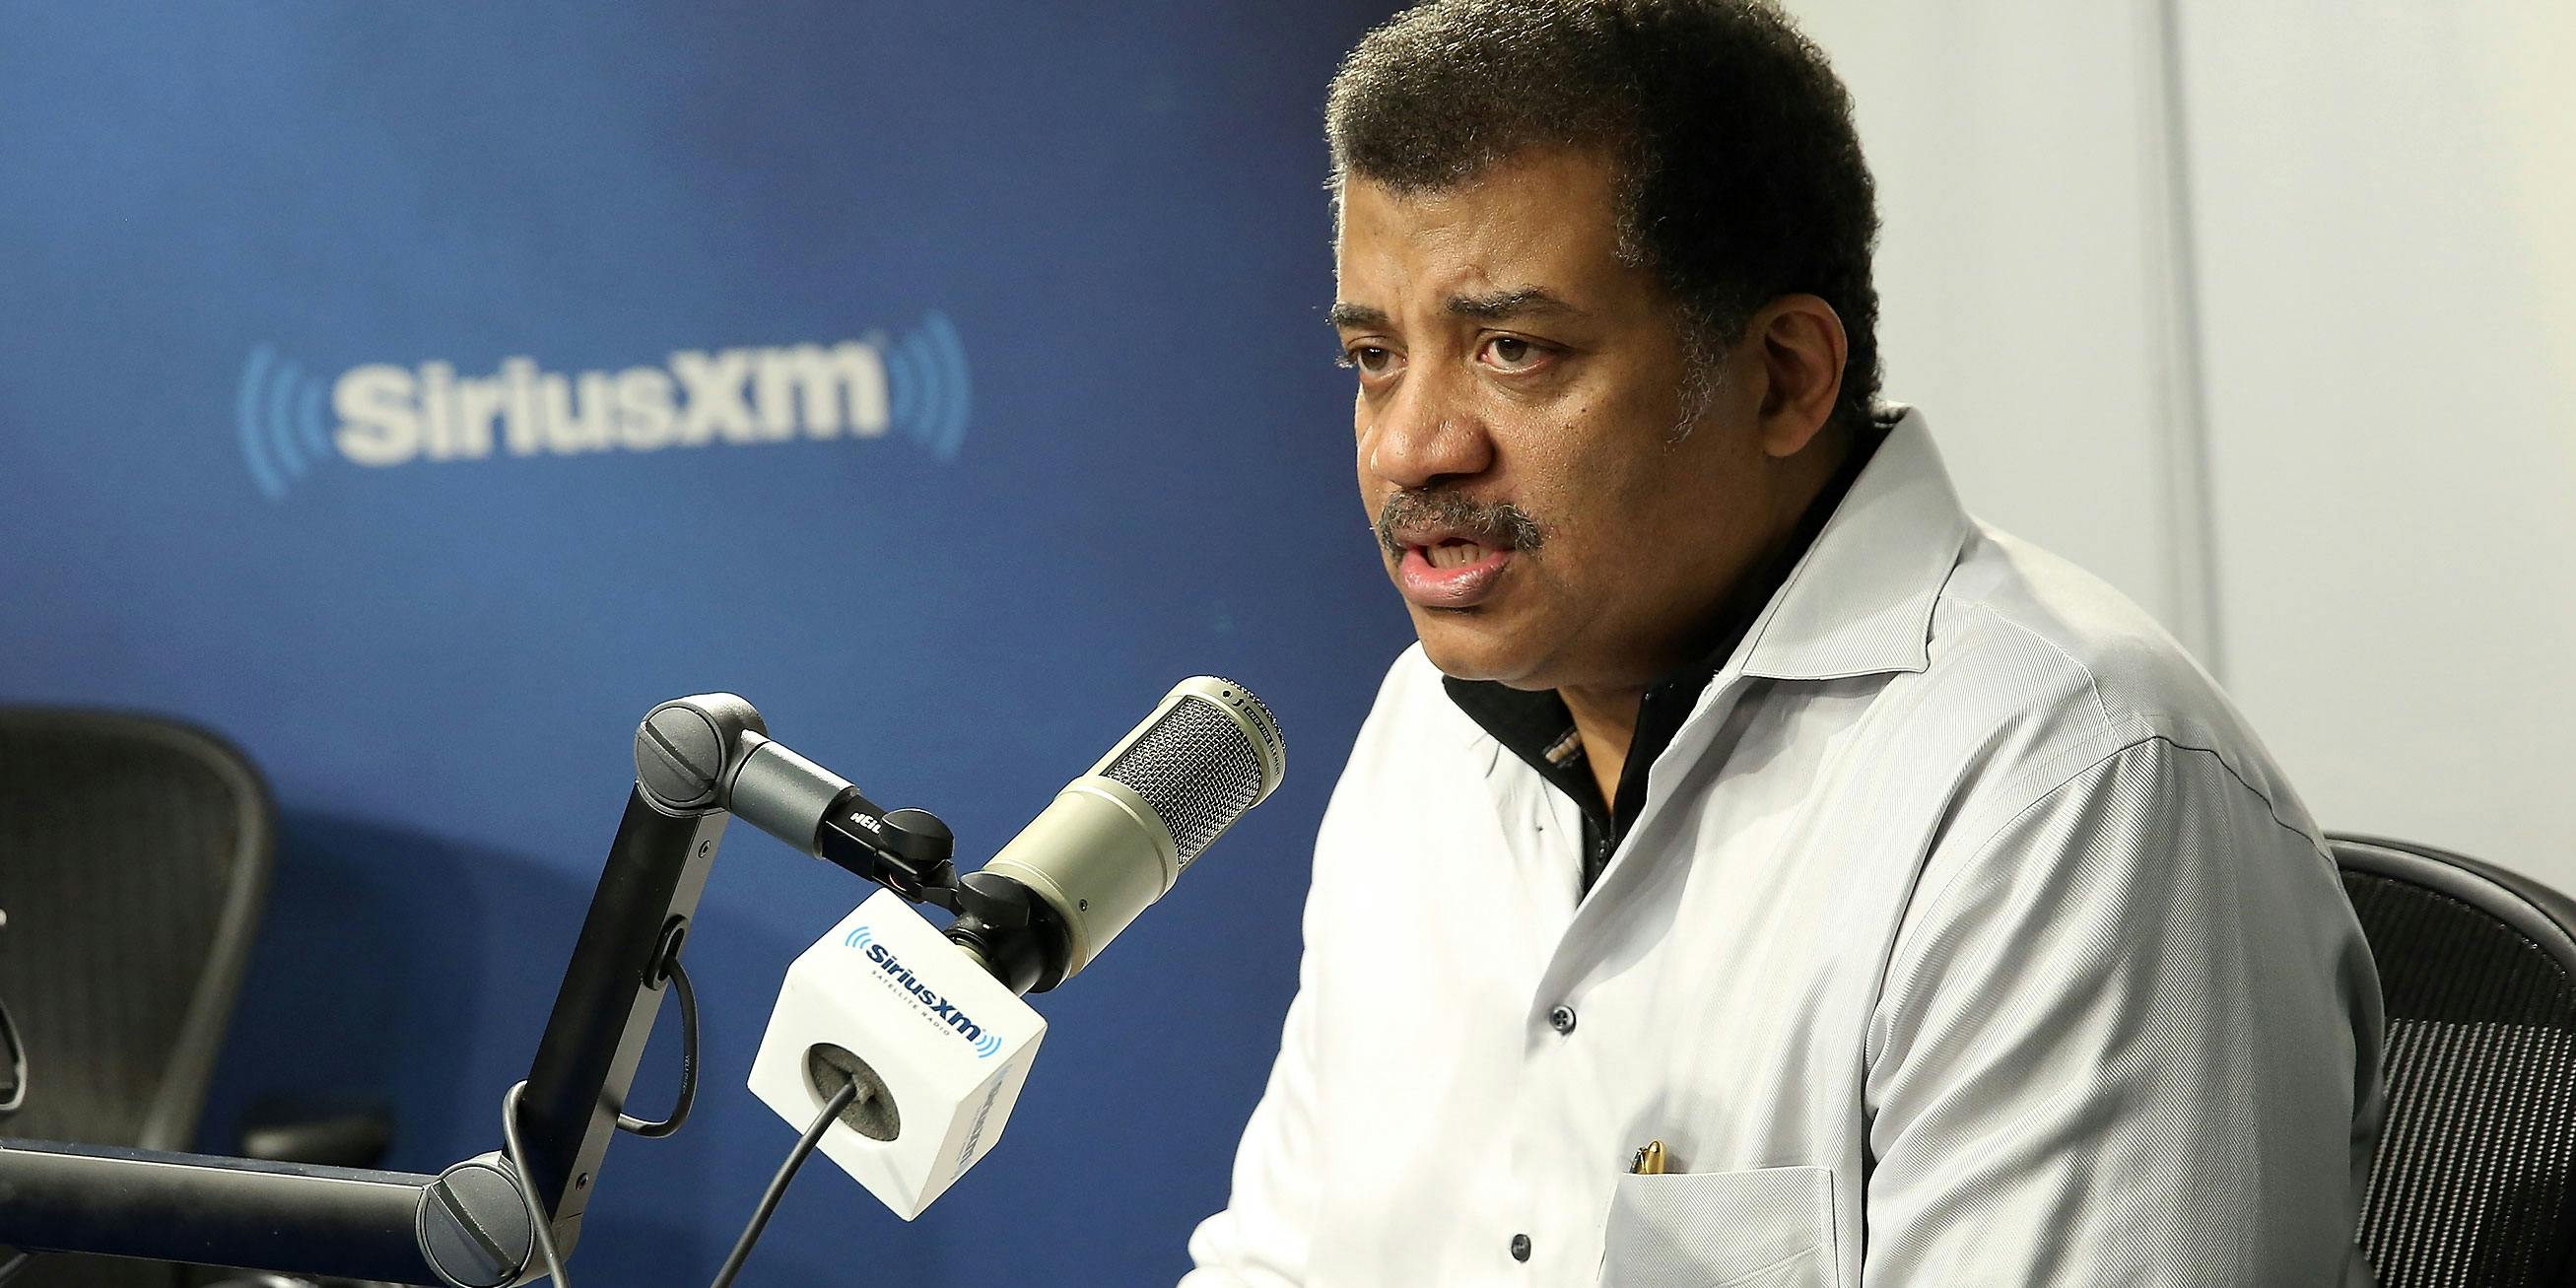 Astrophysicist Neil deGrasse Tyson visits SiriusXM Studios on November 13, 2017 in New York City. He recently defended Elon Musk smoking weed.